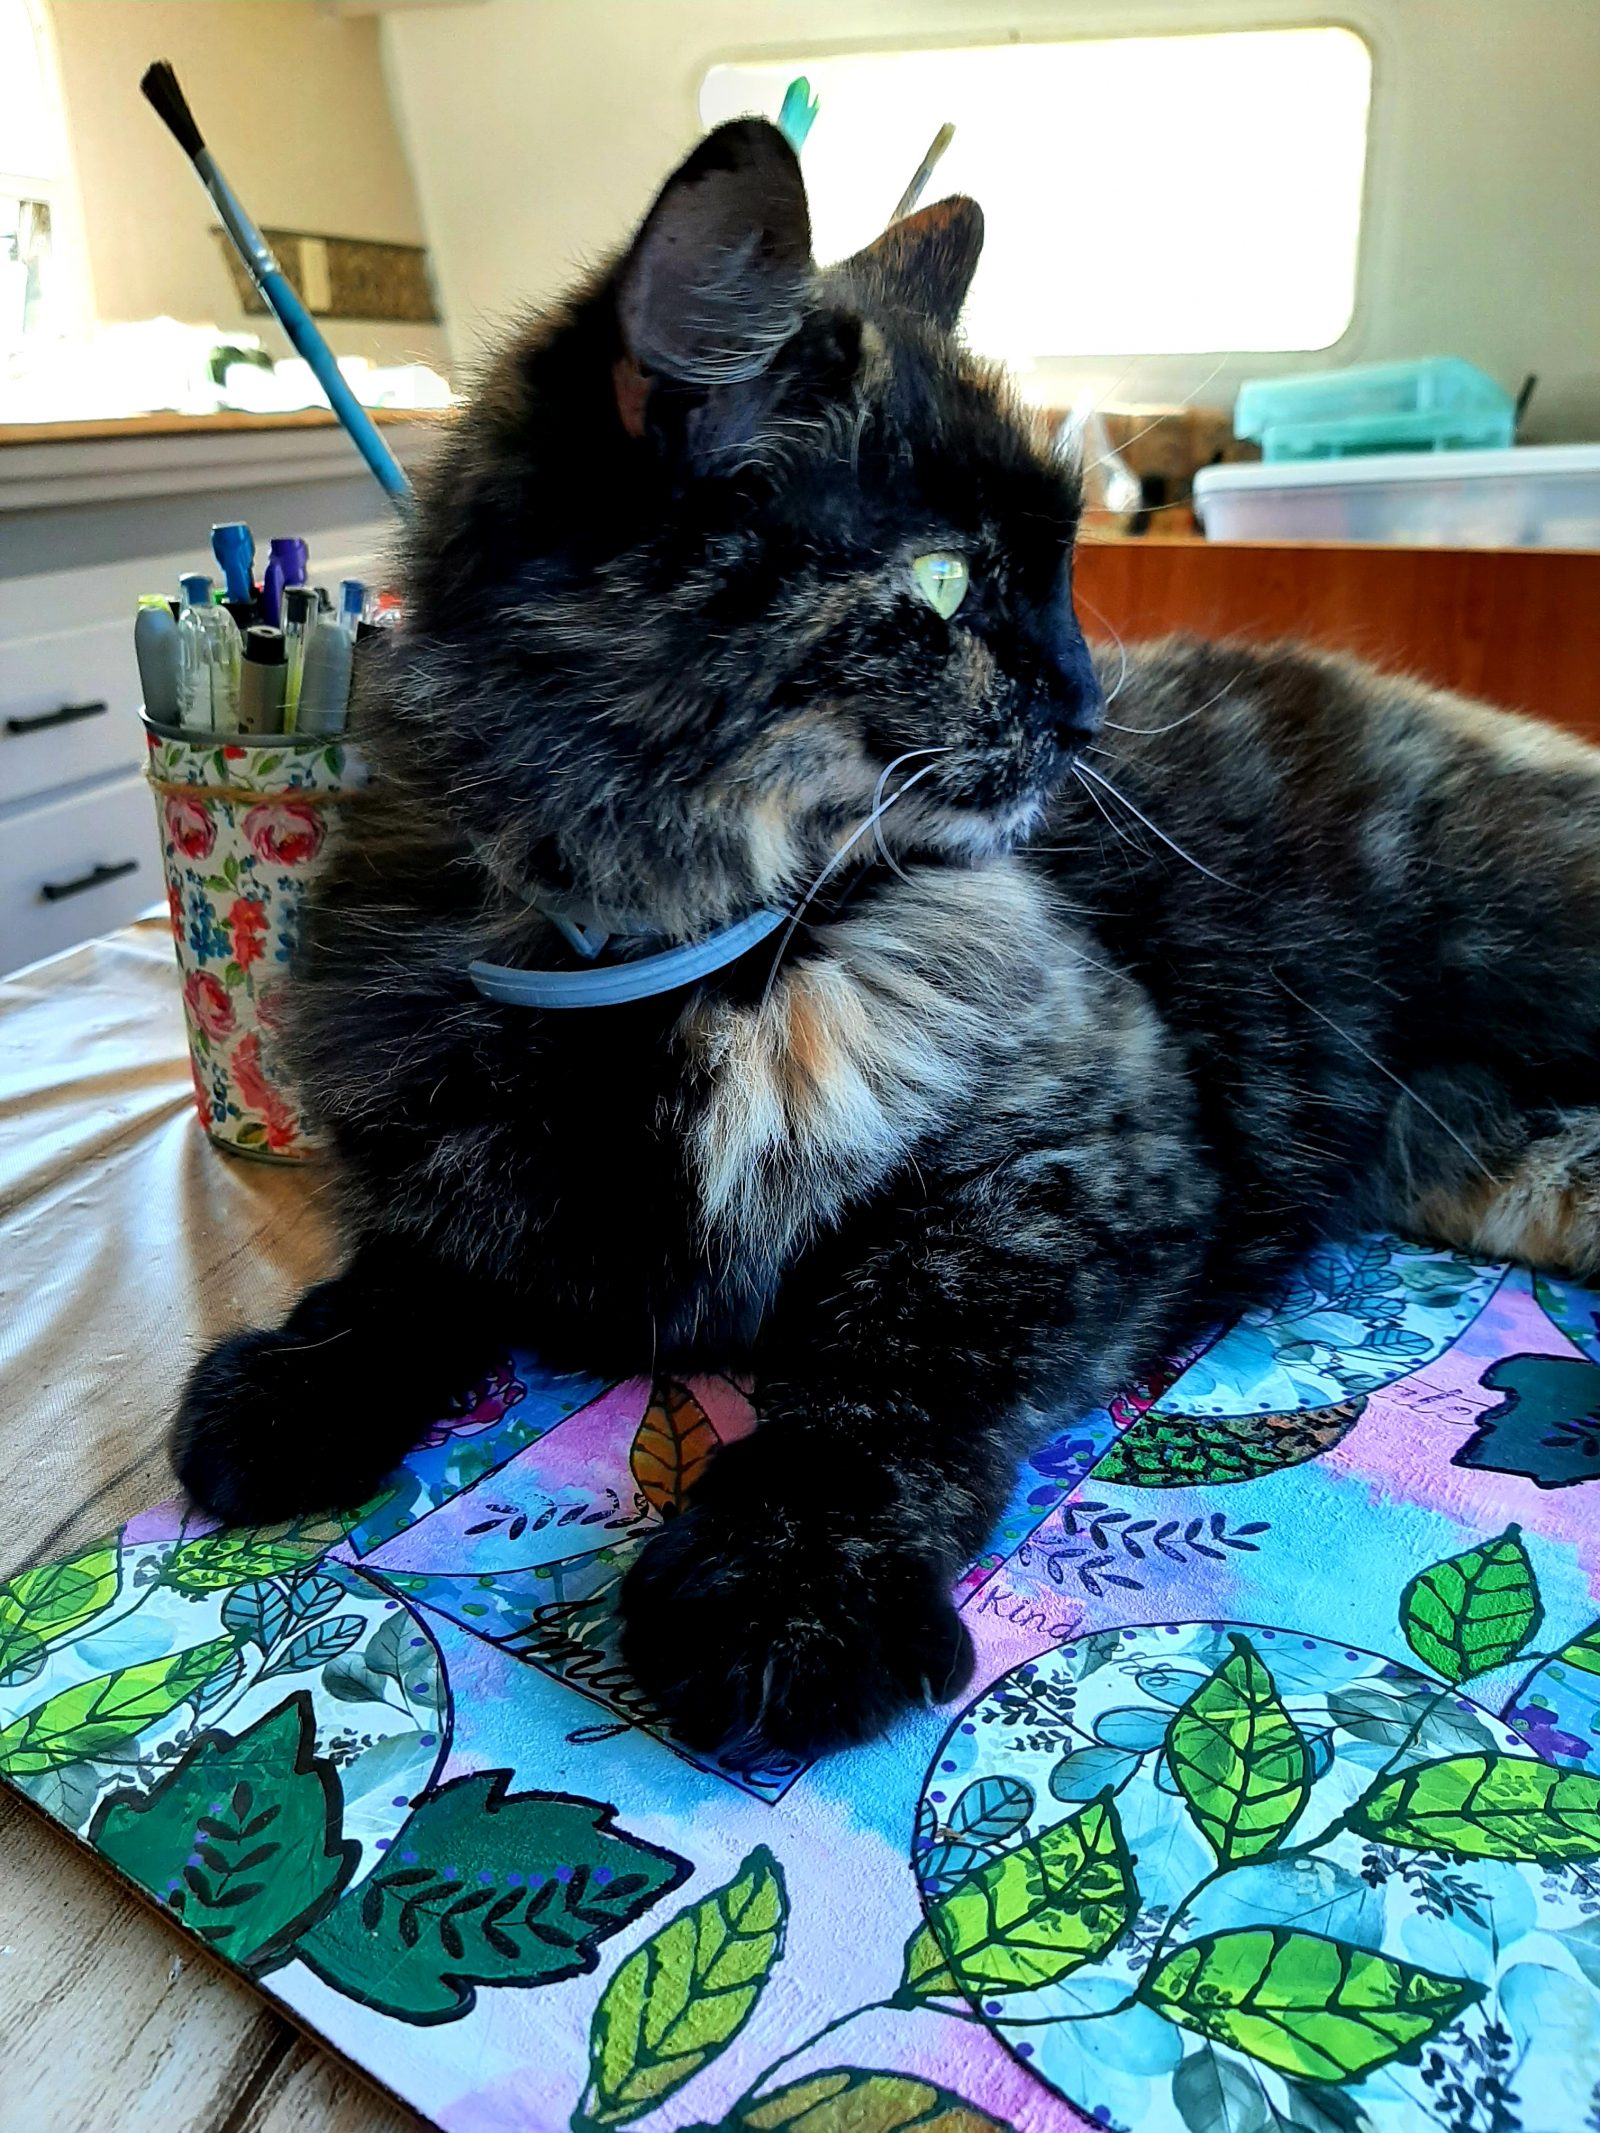 The Crafter Kitty